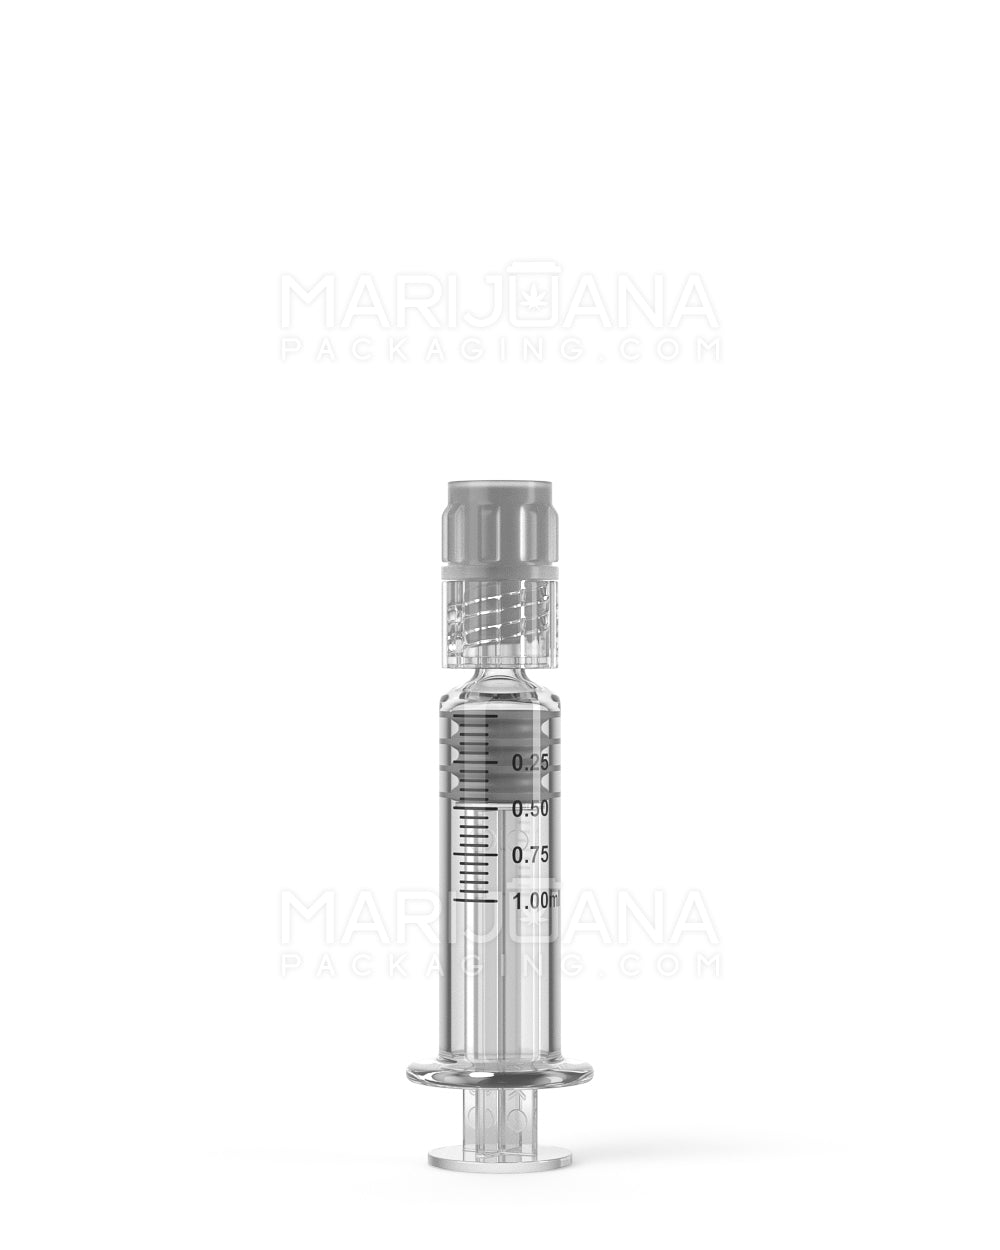 Luer Lock | Glass Dab Applicator Syringes | 1mL - 0.25mL Increments - 100 Count - 8